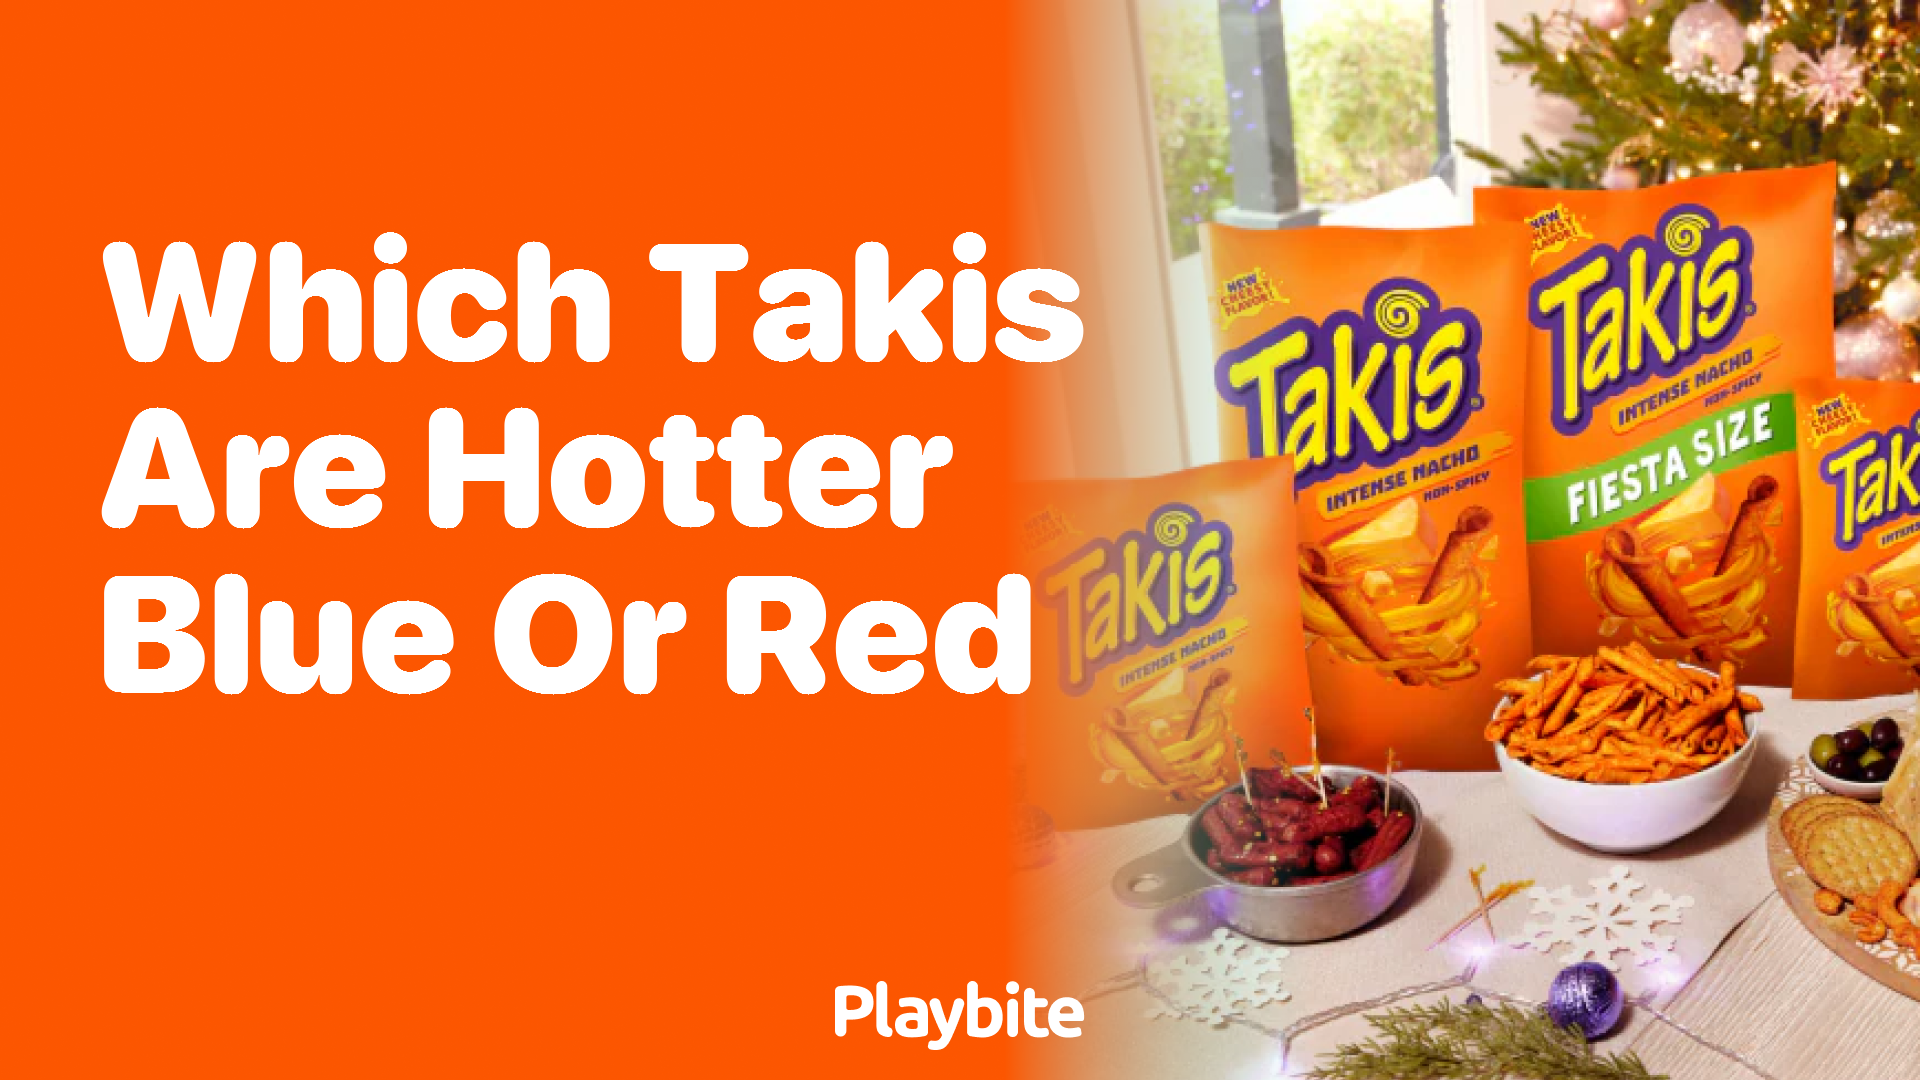 Which Takis Are Hotter: Blue or Red?